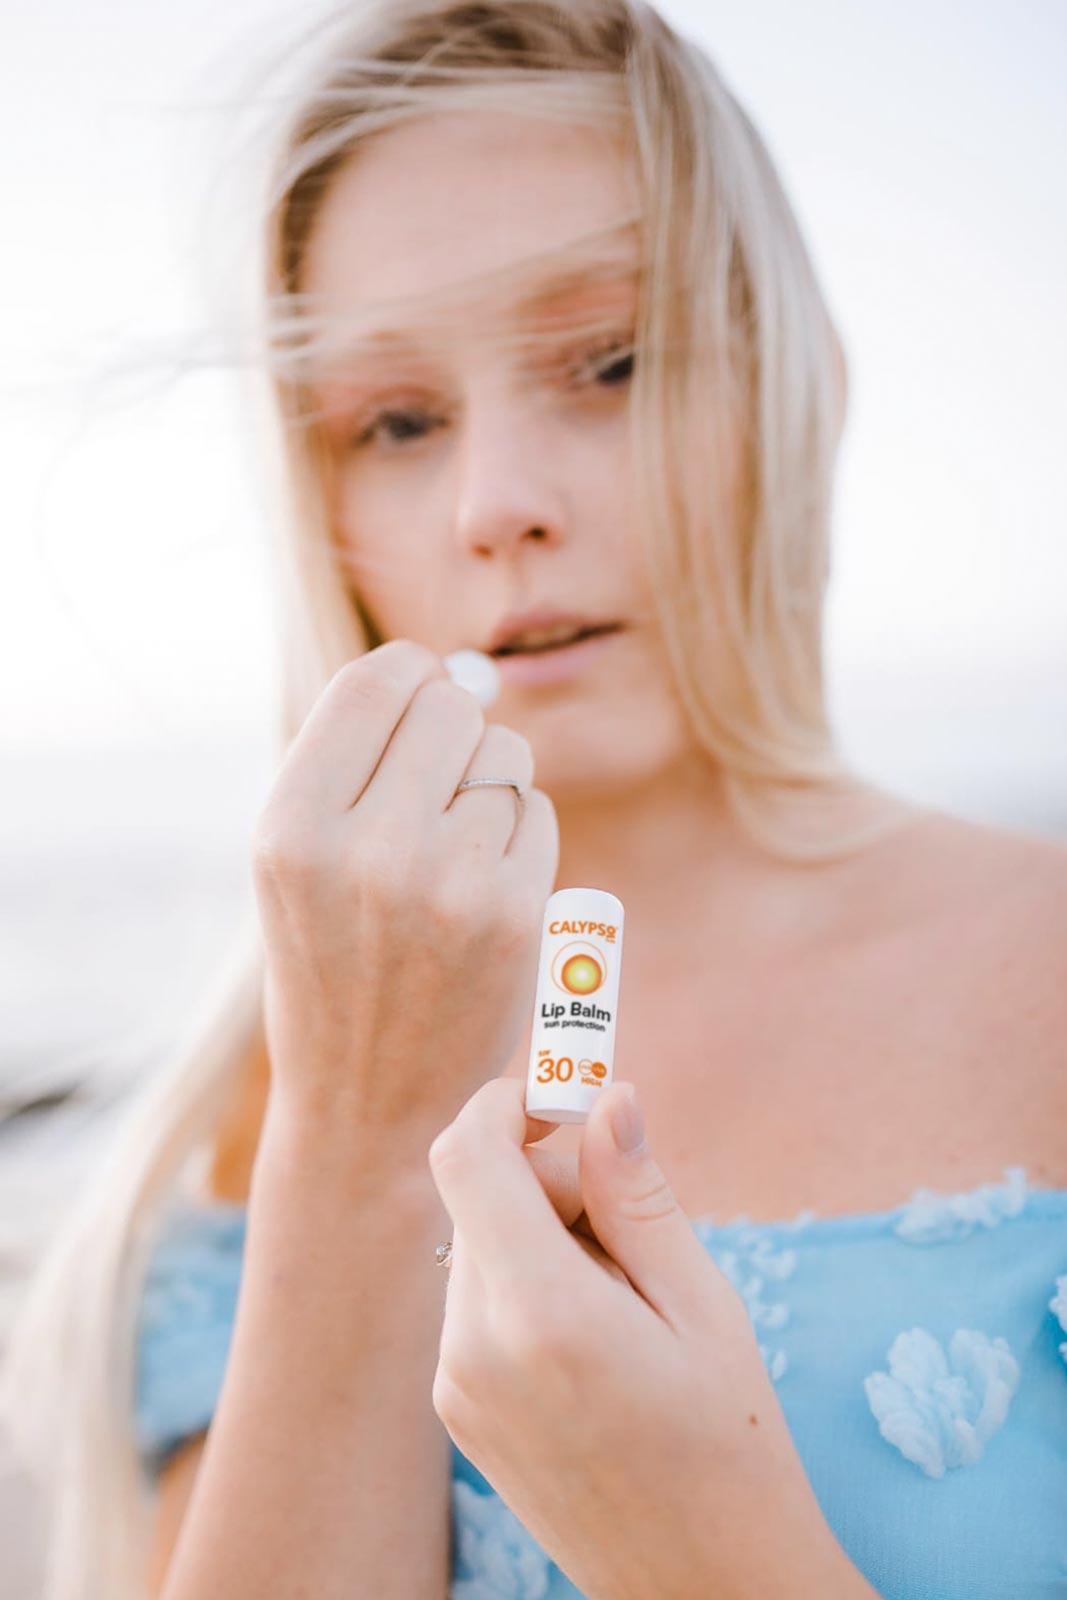 Calypso lip balm used on a beach in a cloudy day